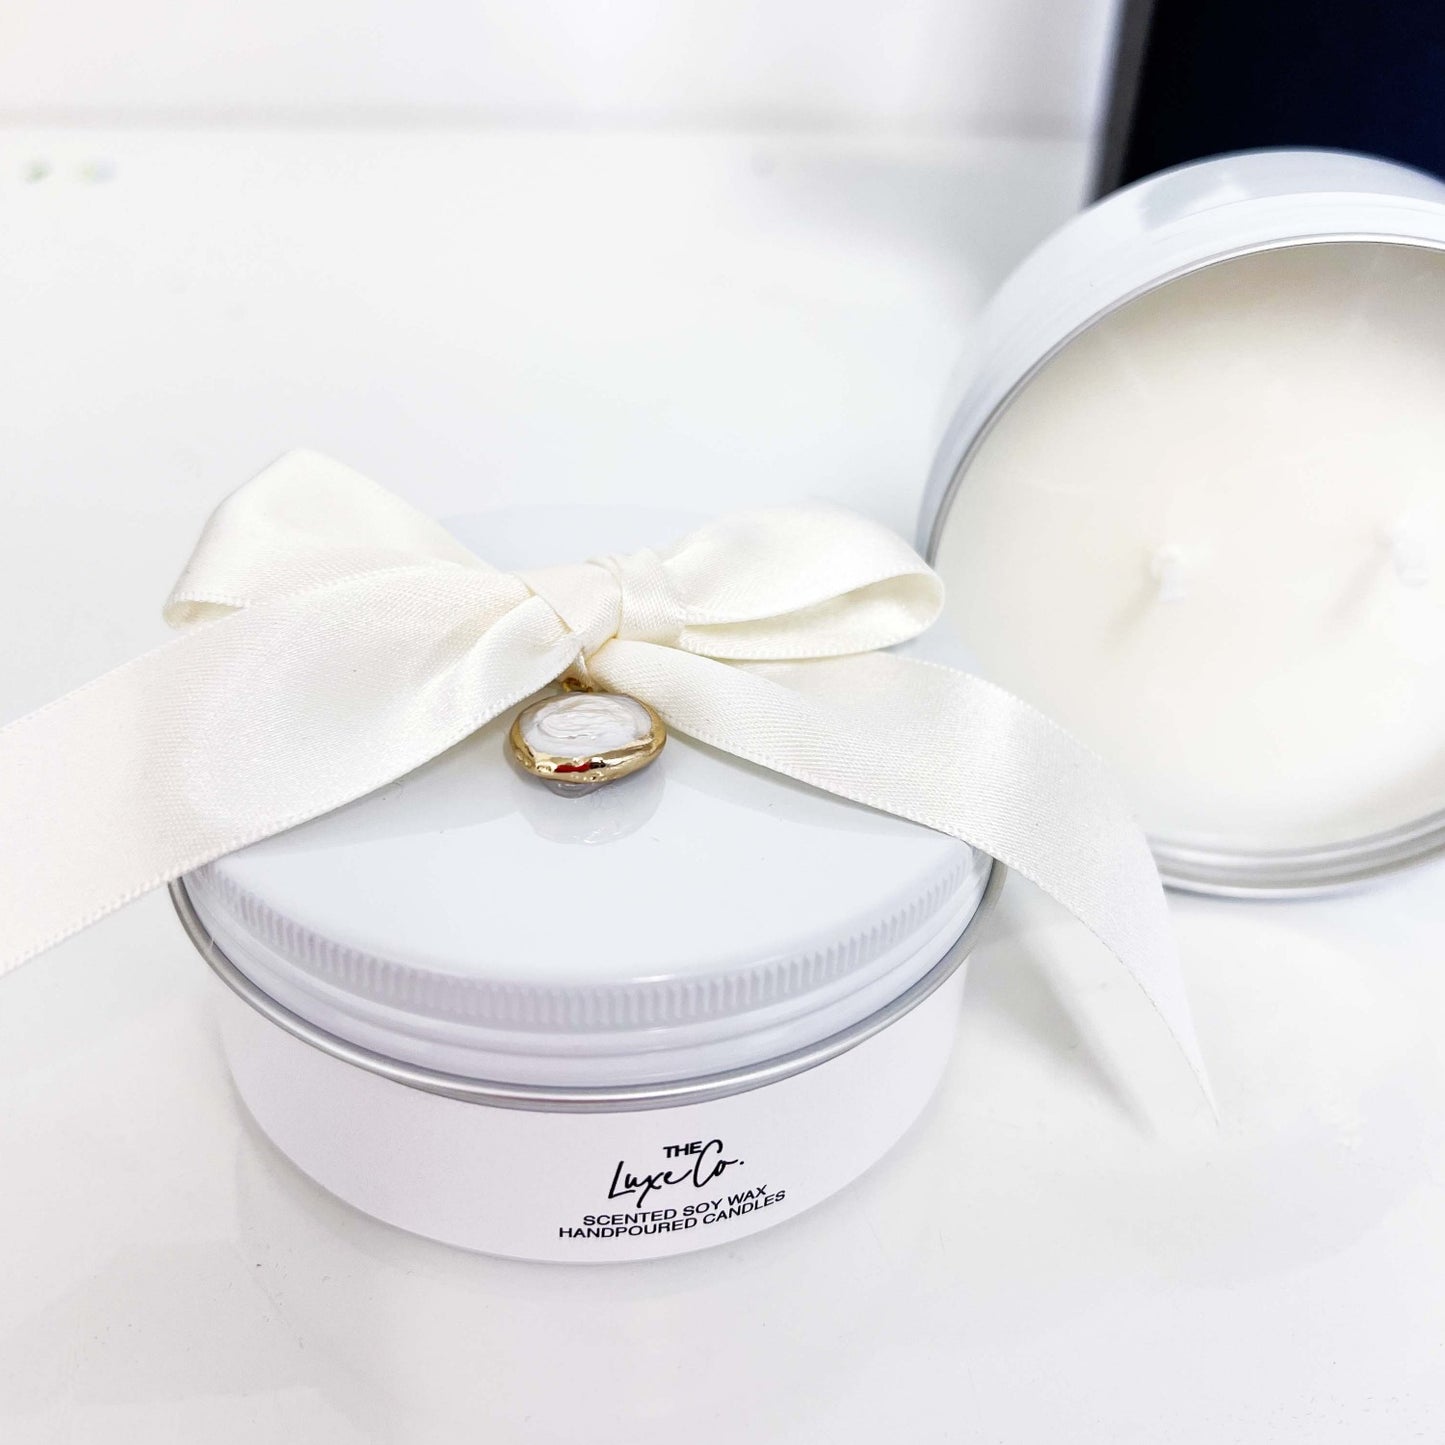 Natural pearl scented soy wax candle gift